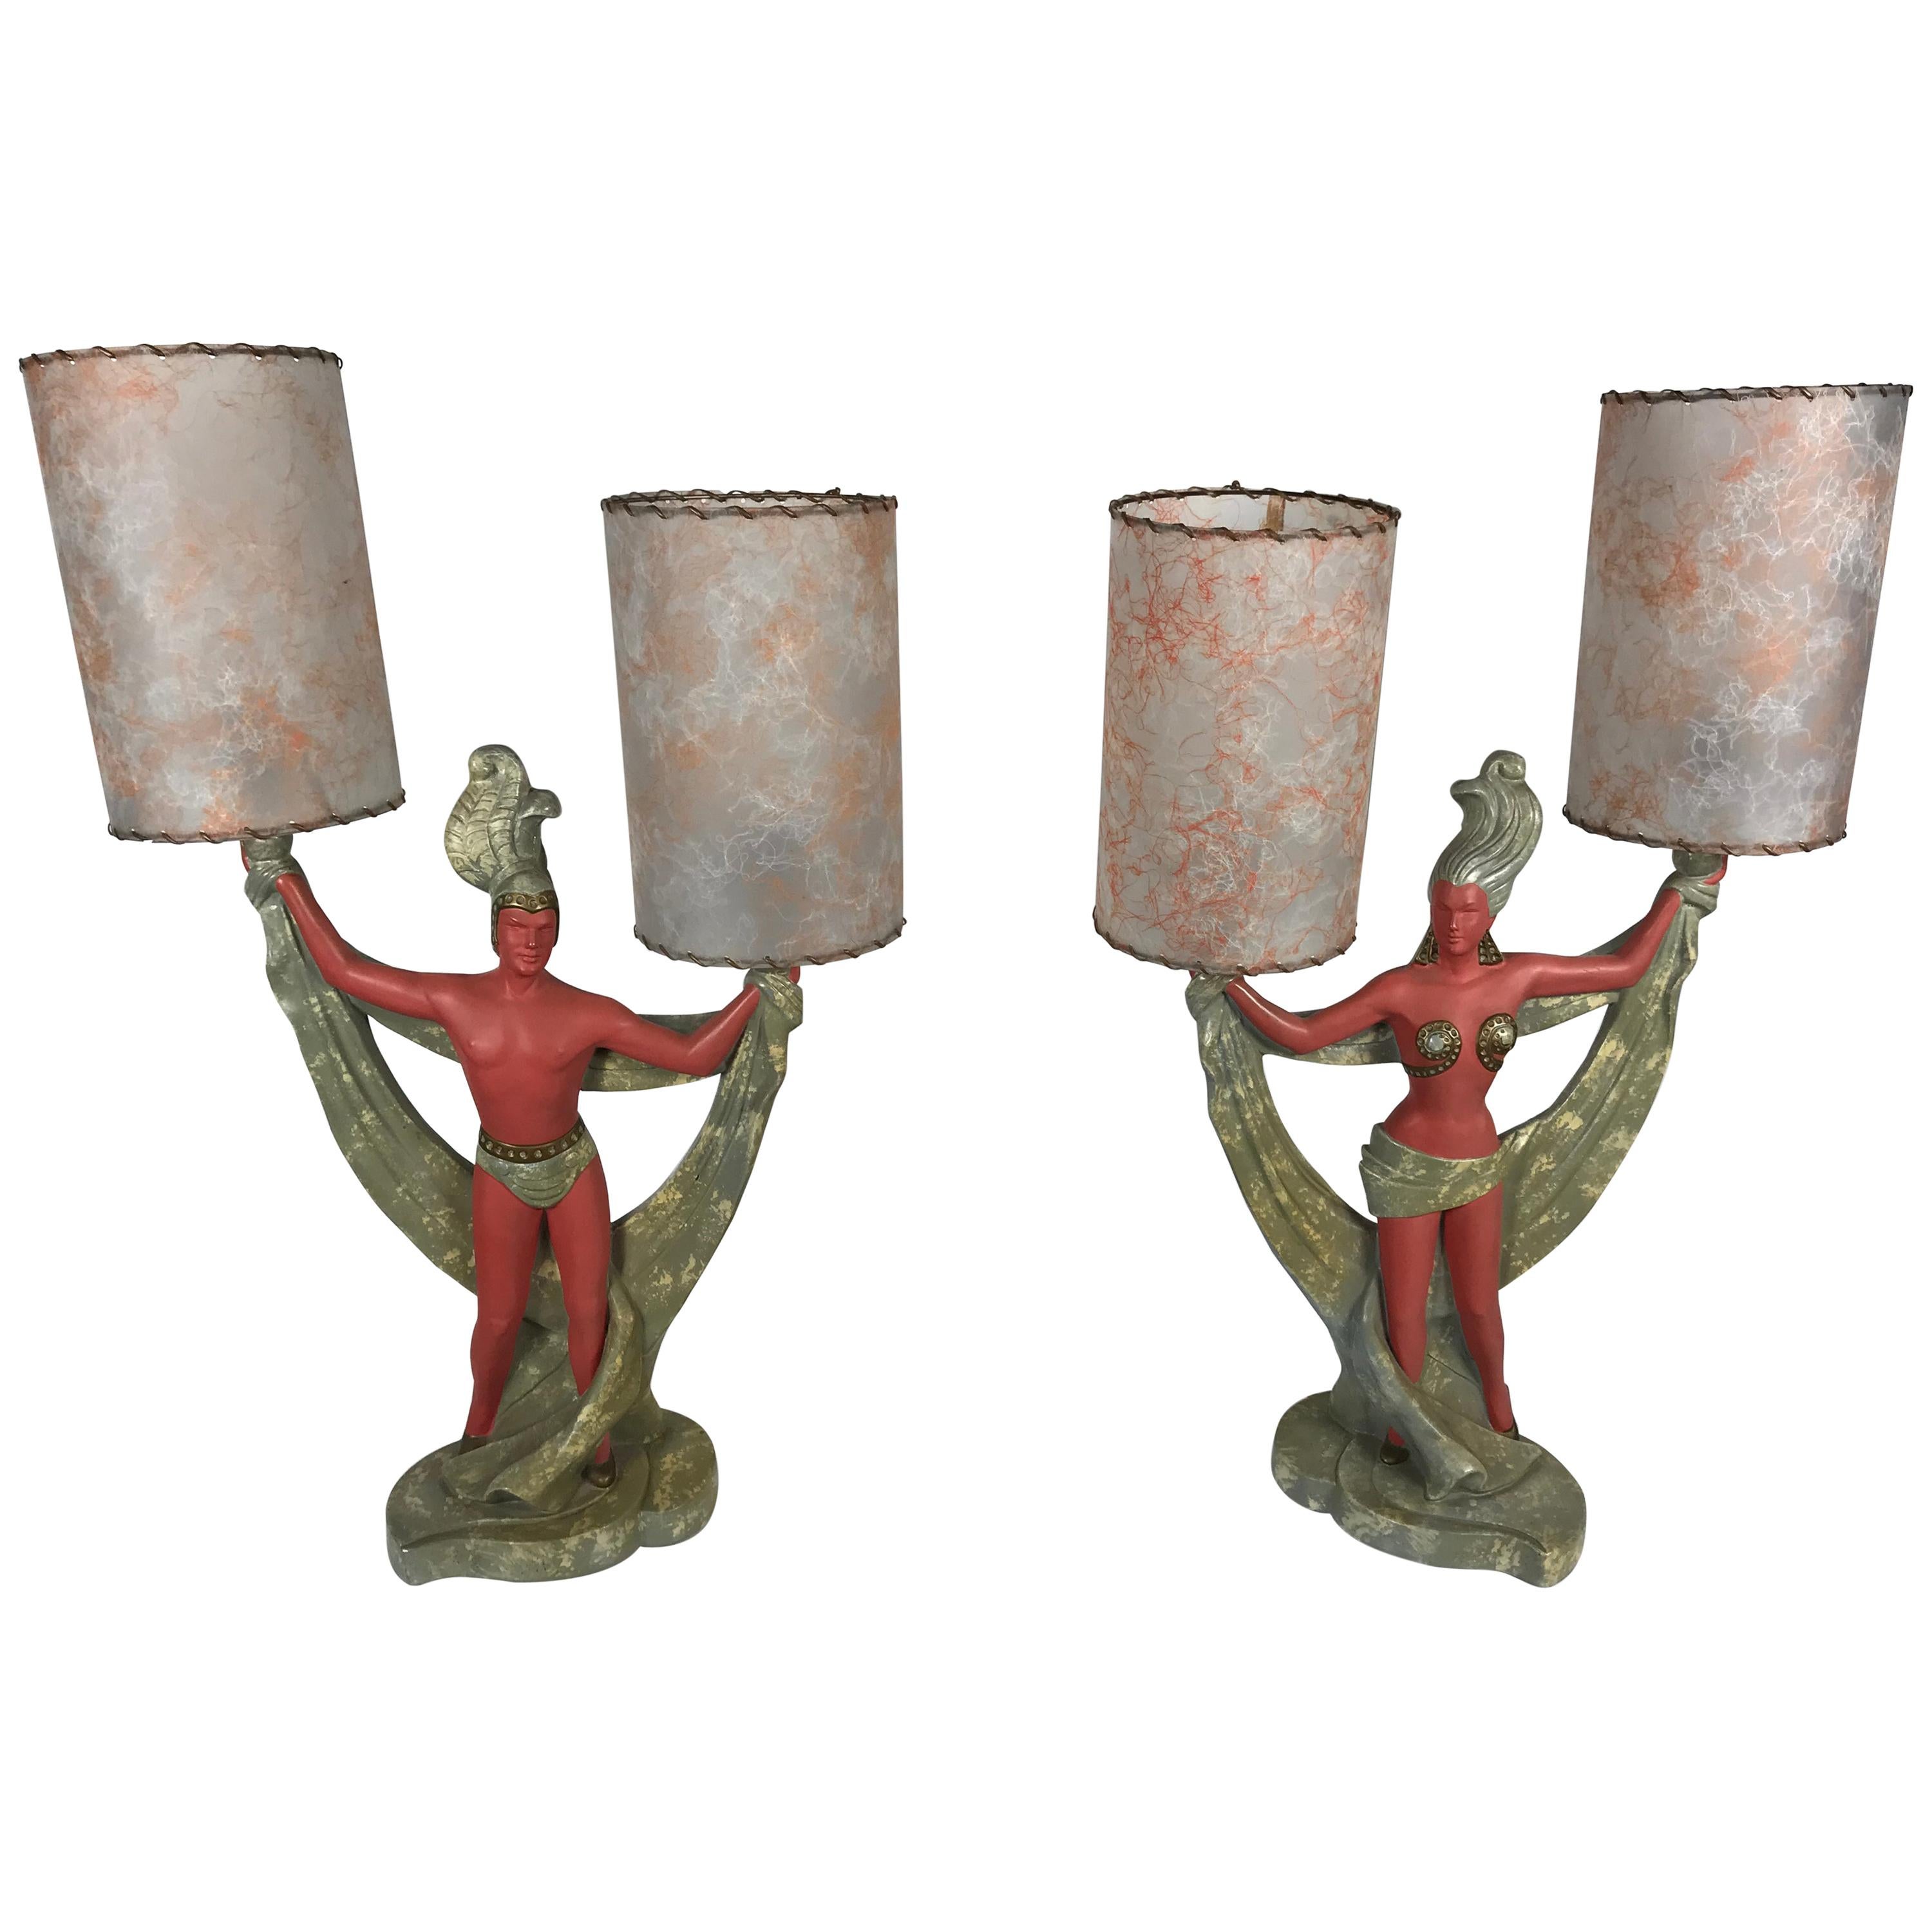 Classic Mid-Century Modern Plaster Figural Lamps, Continental Art Co., 1950s